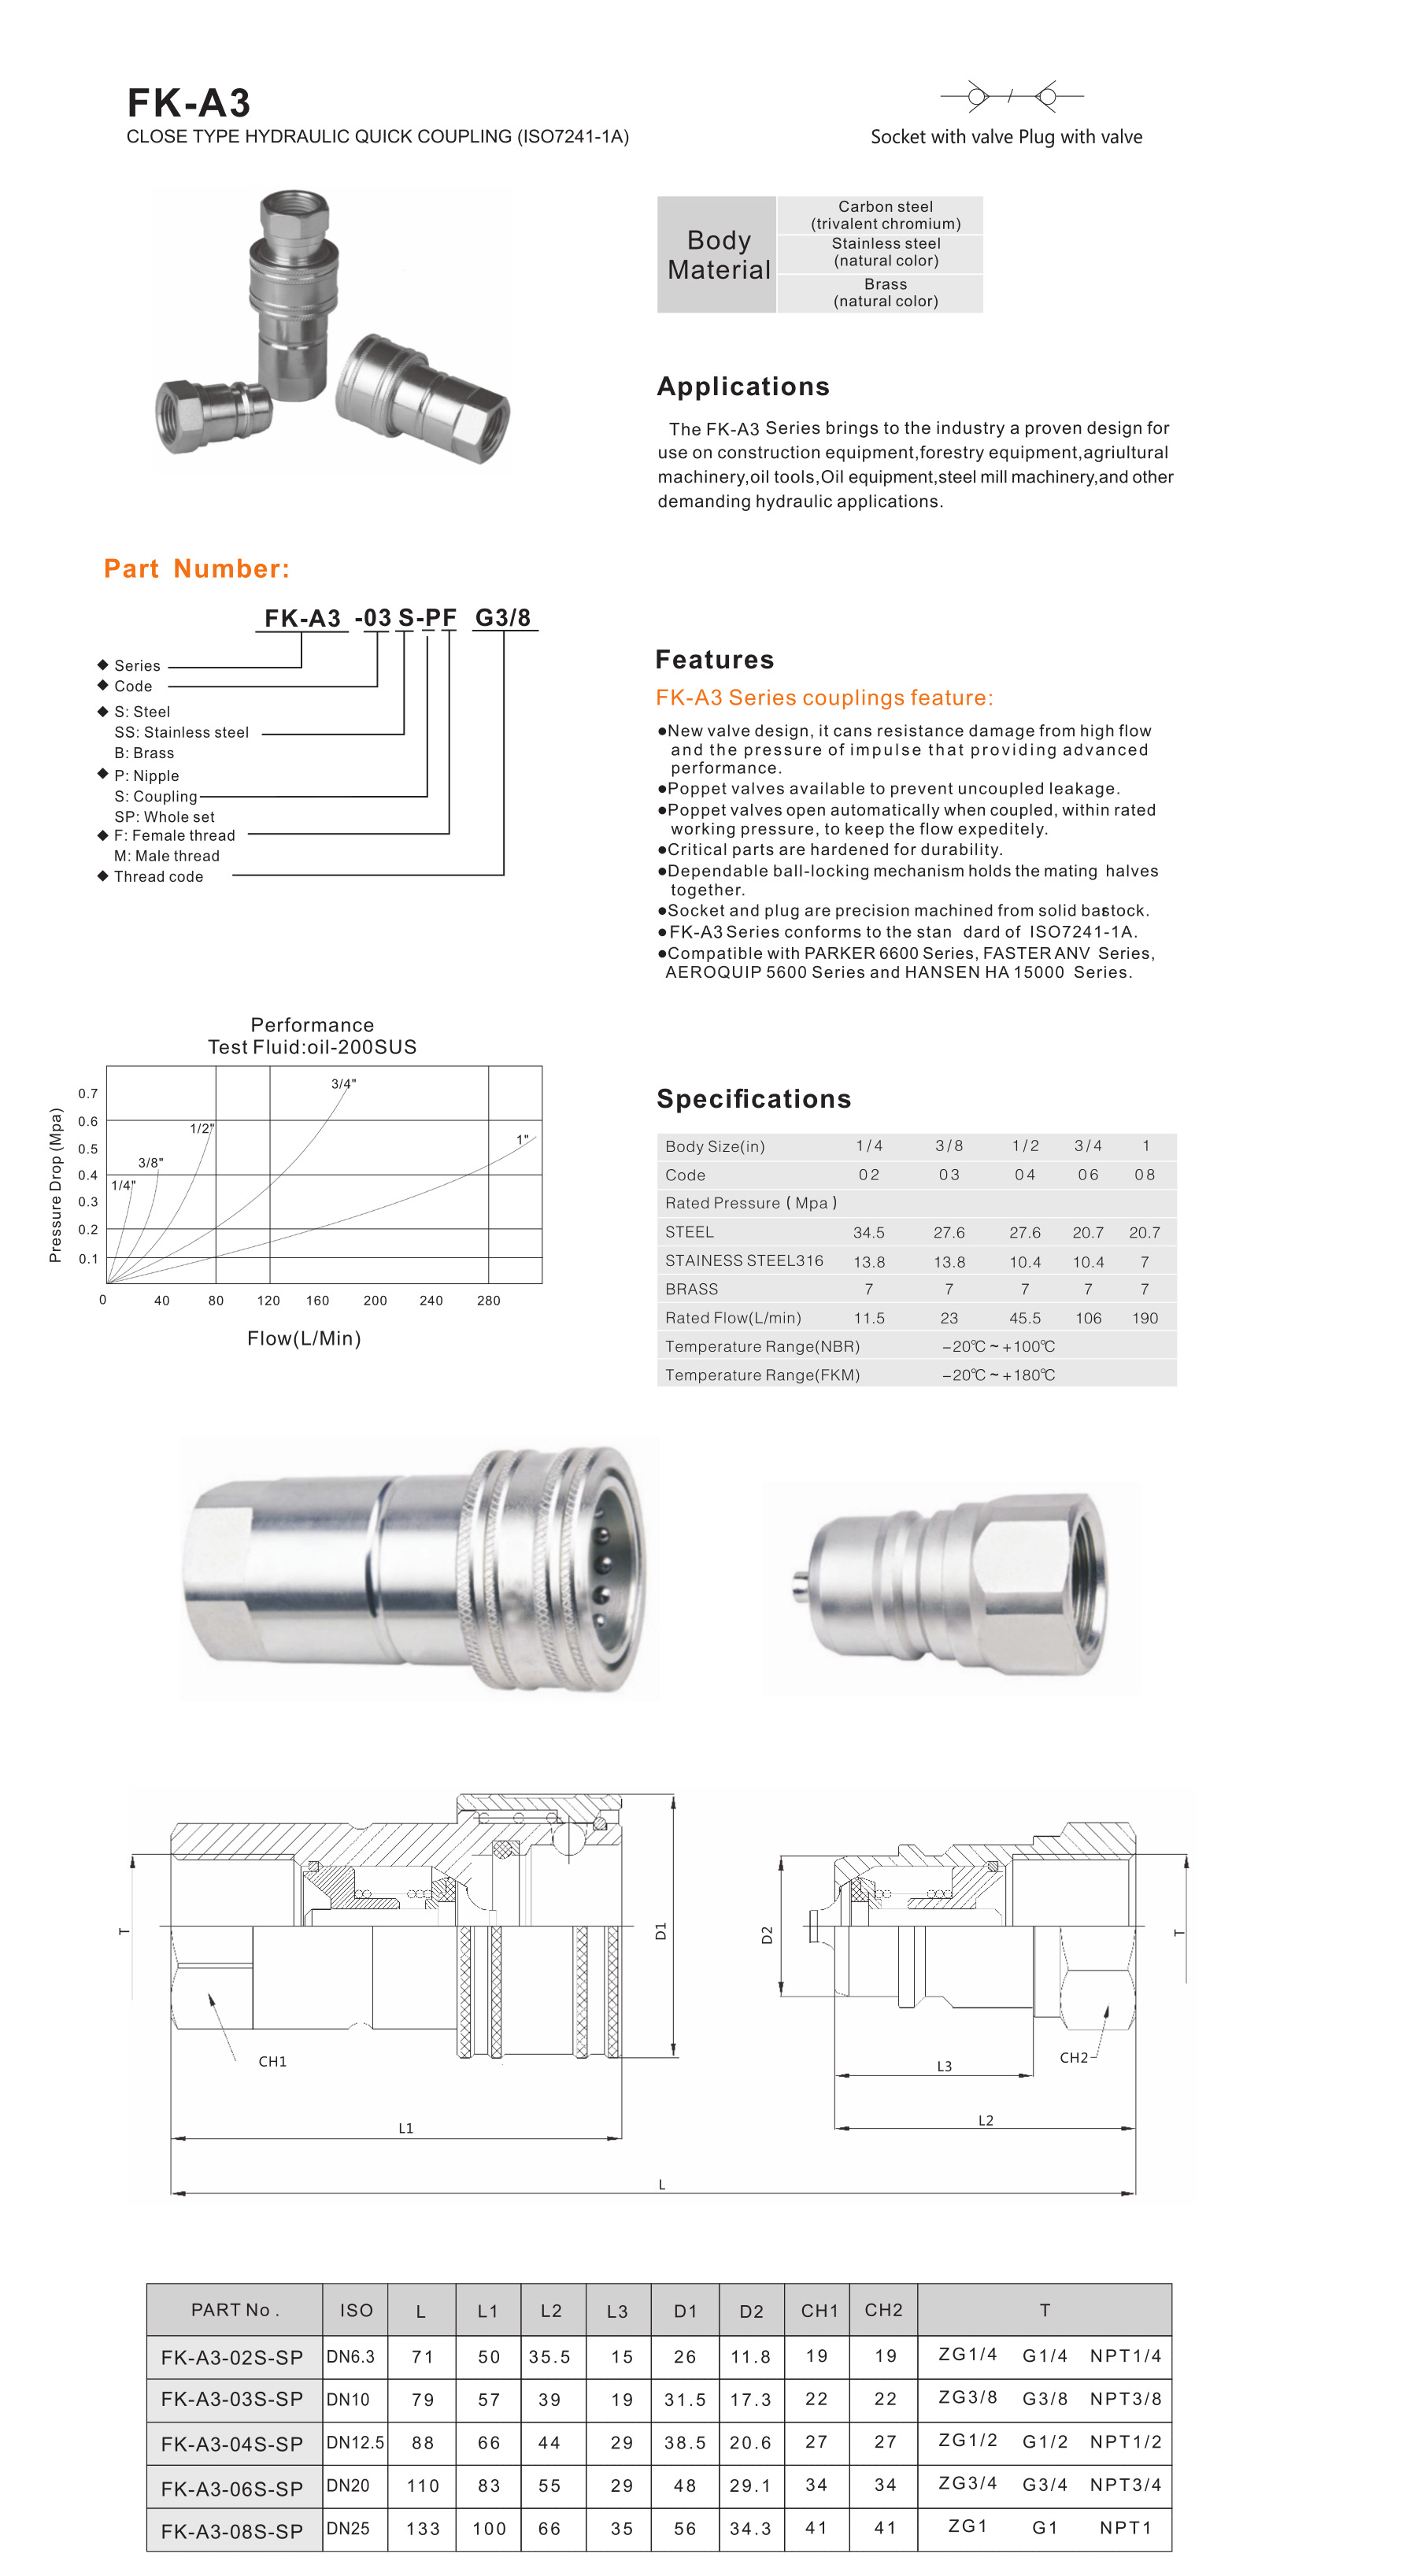 FK-A3 Series close type hydraulic quick coupling